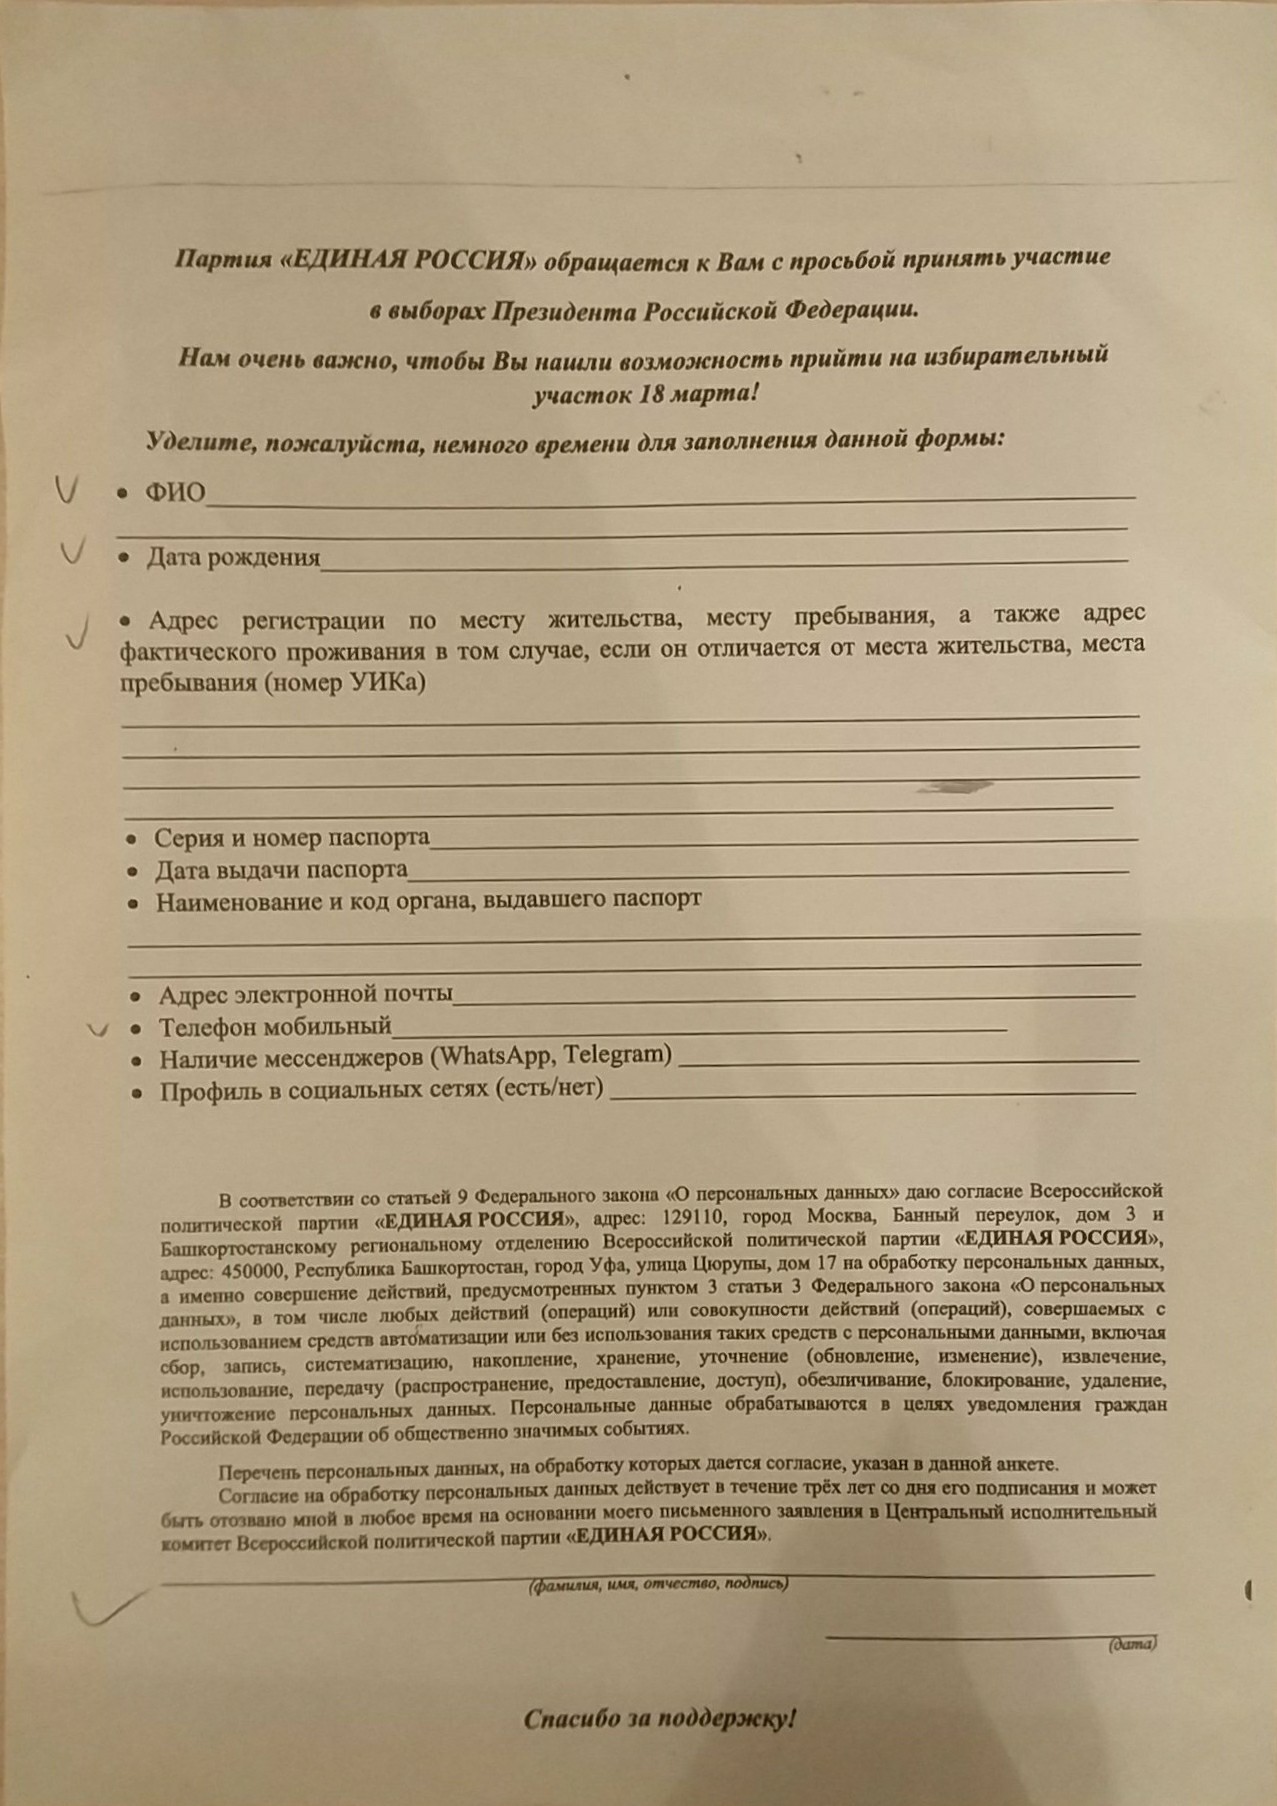 Third-graders are handed out questionnaires from United Russia - My, Politics, United Russia, Pupils, Agitation, Elections 2018